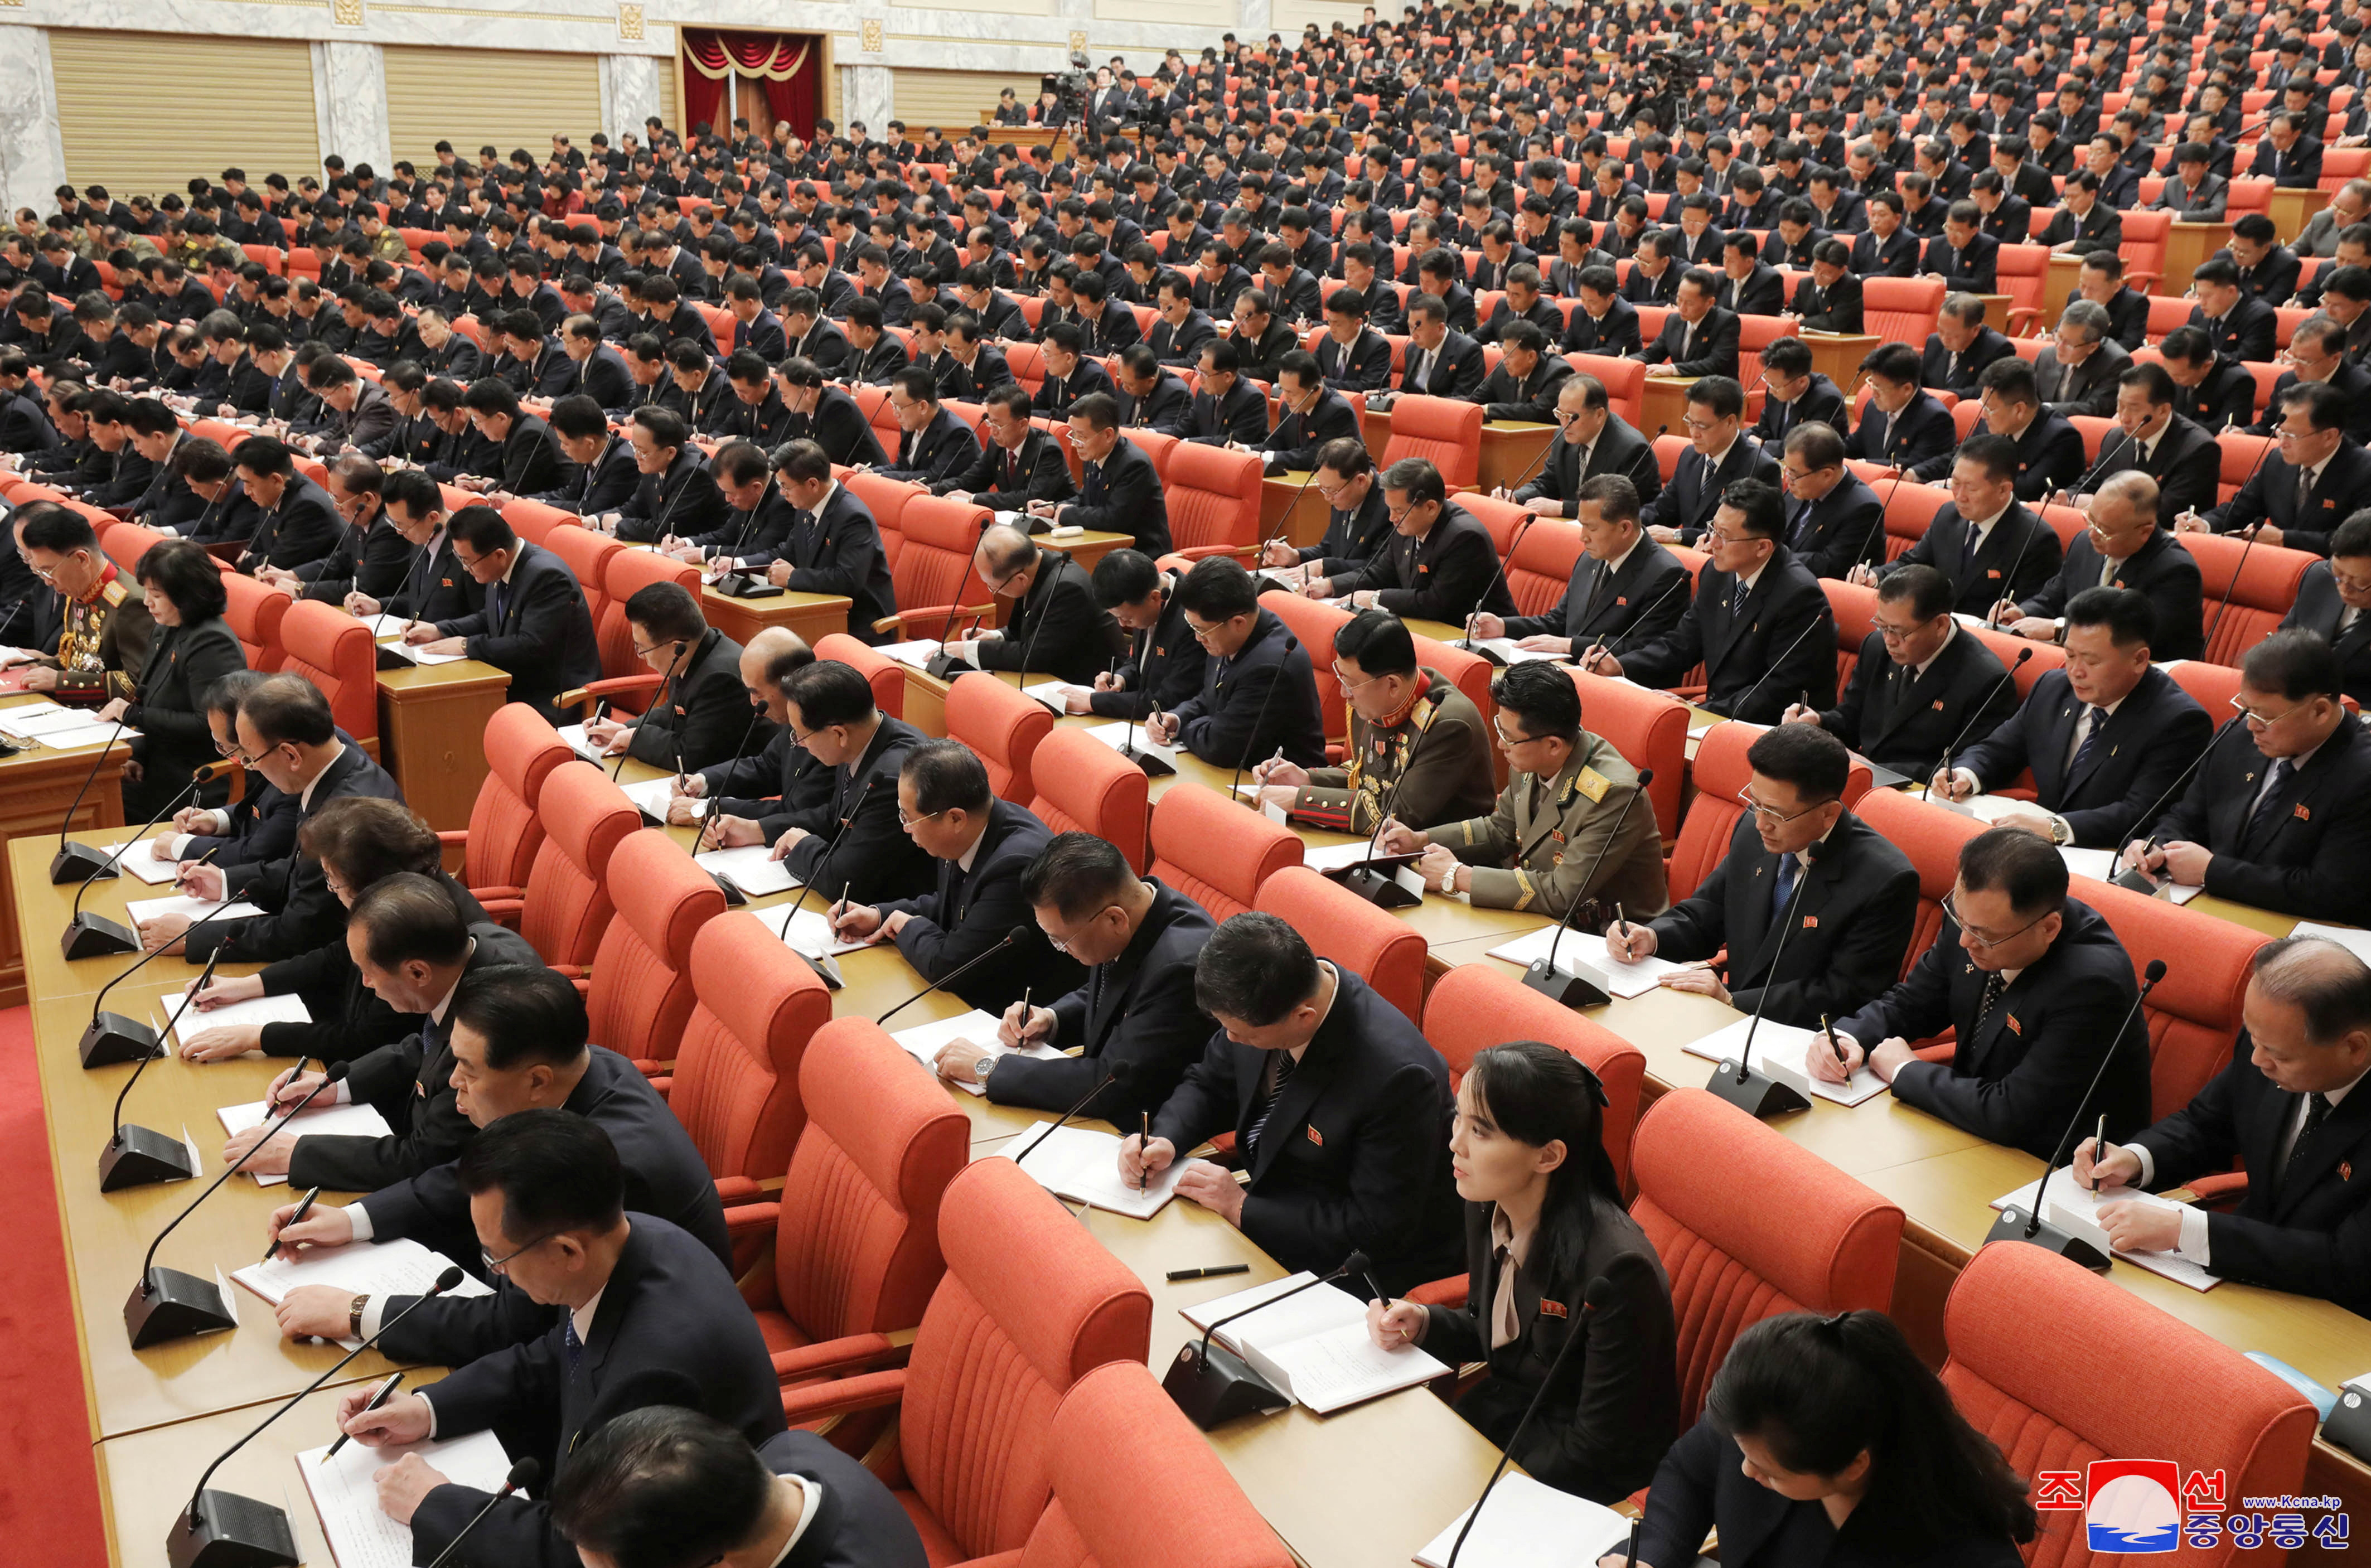 The 7th enlarged plenary meeting of the 8th Central Committee of the Workers' Party of Korea (WPK) in Pyongyang